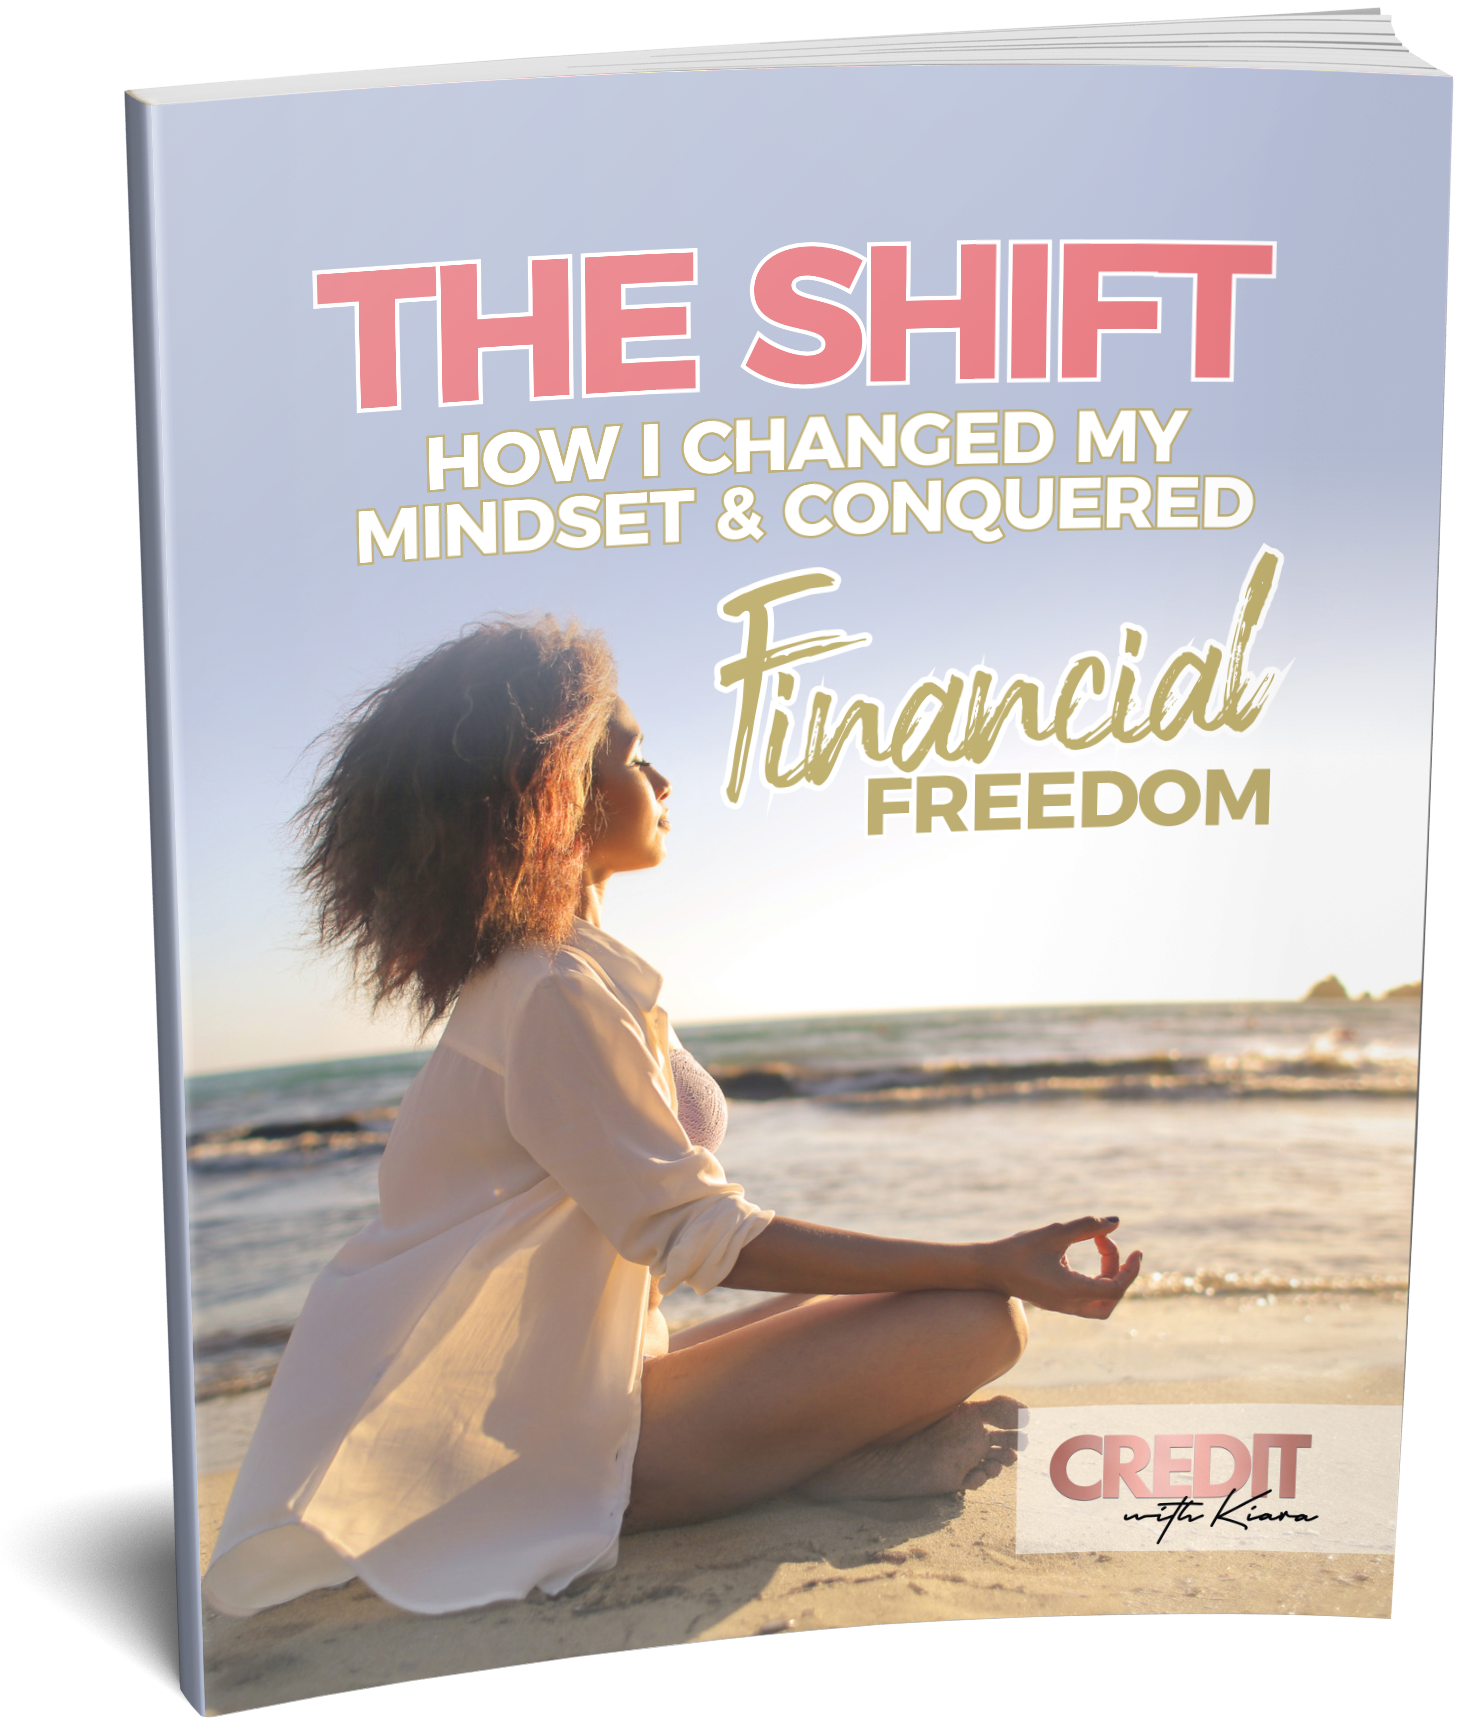 The Shift: How I Changed My Mindset & Conquered Financial Freedom - Credit With Kiara